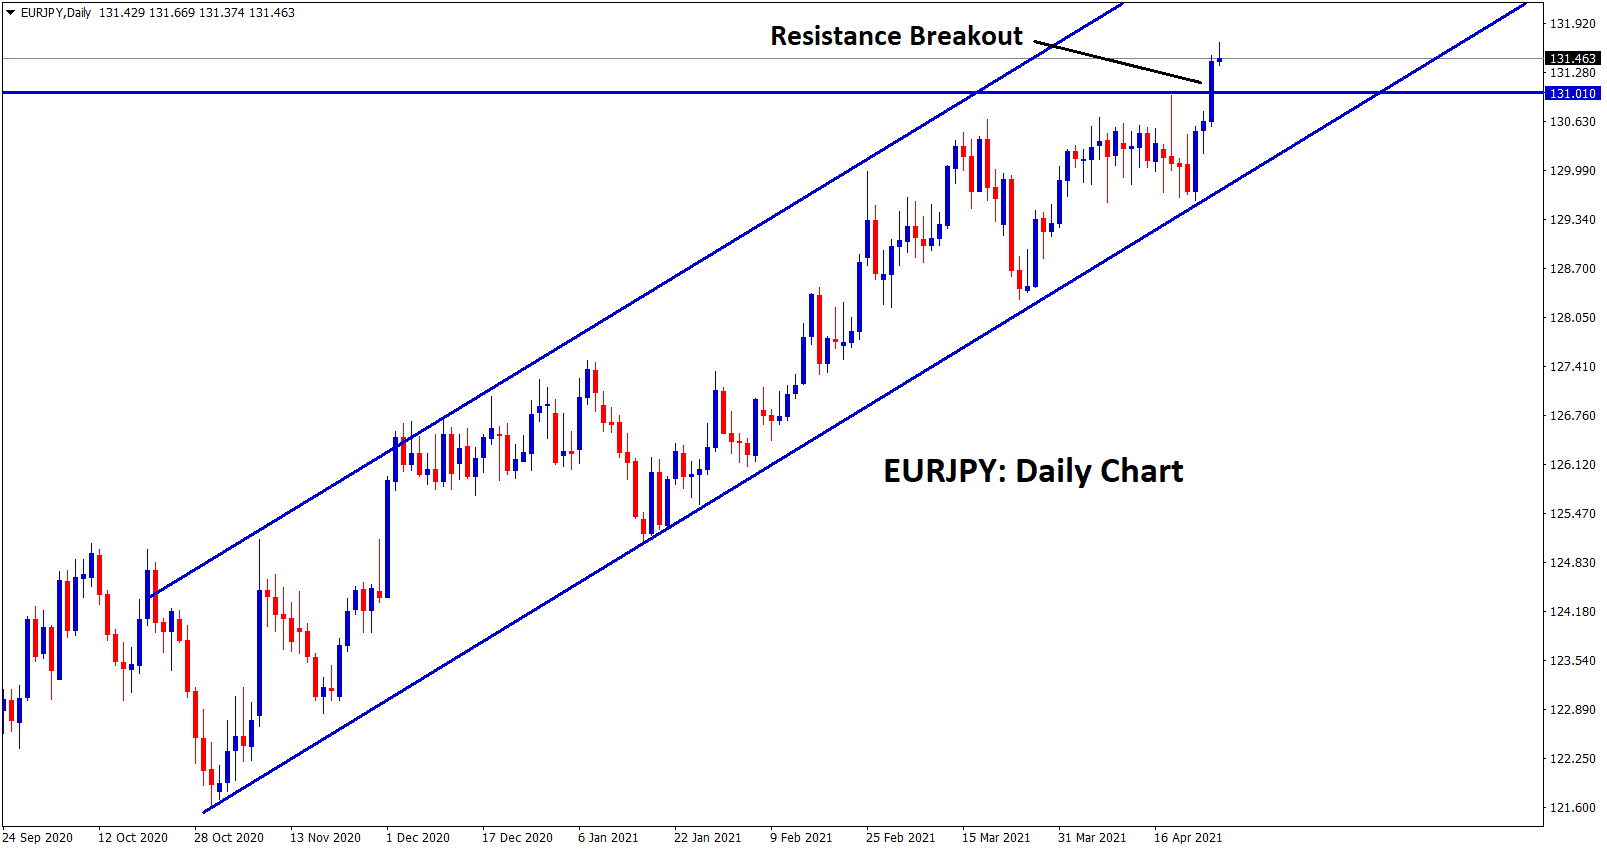 EURJPY resistance breakout in the daily chart